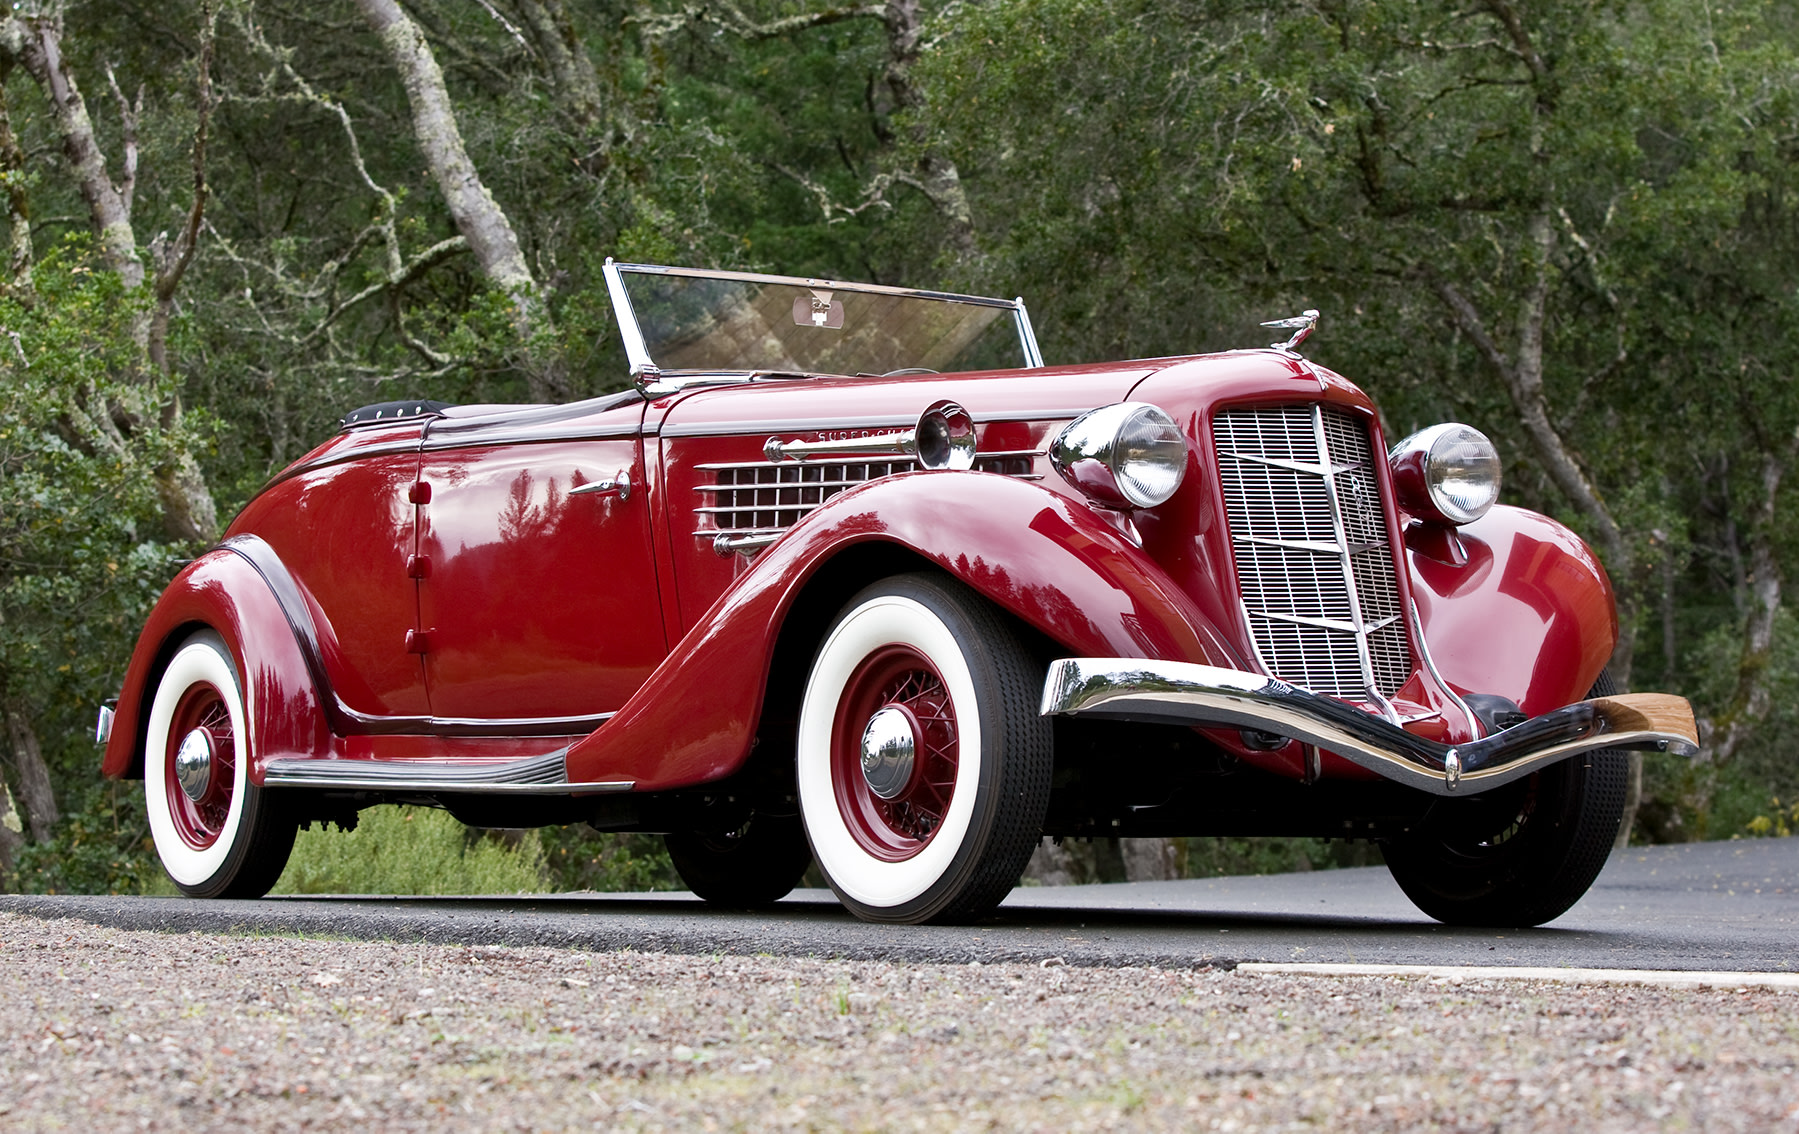 1935 Auburn 851 Supercharged Cabriolet